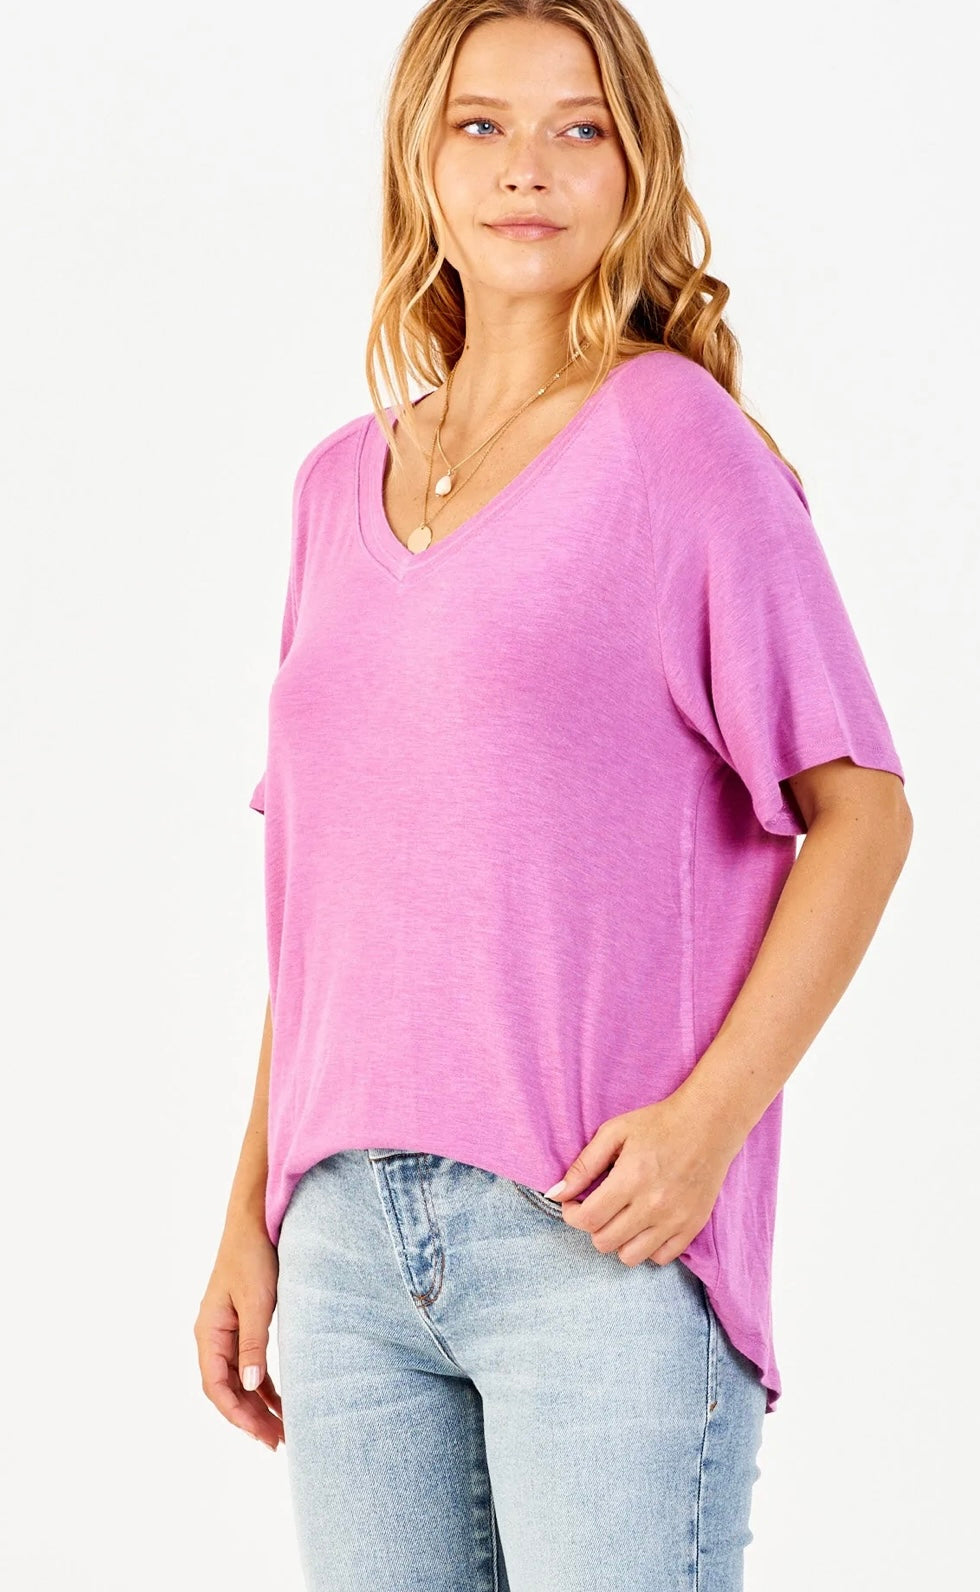 THE TAYLOR TOP